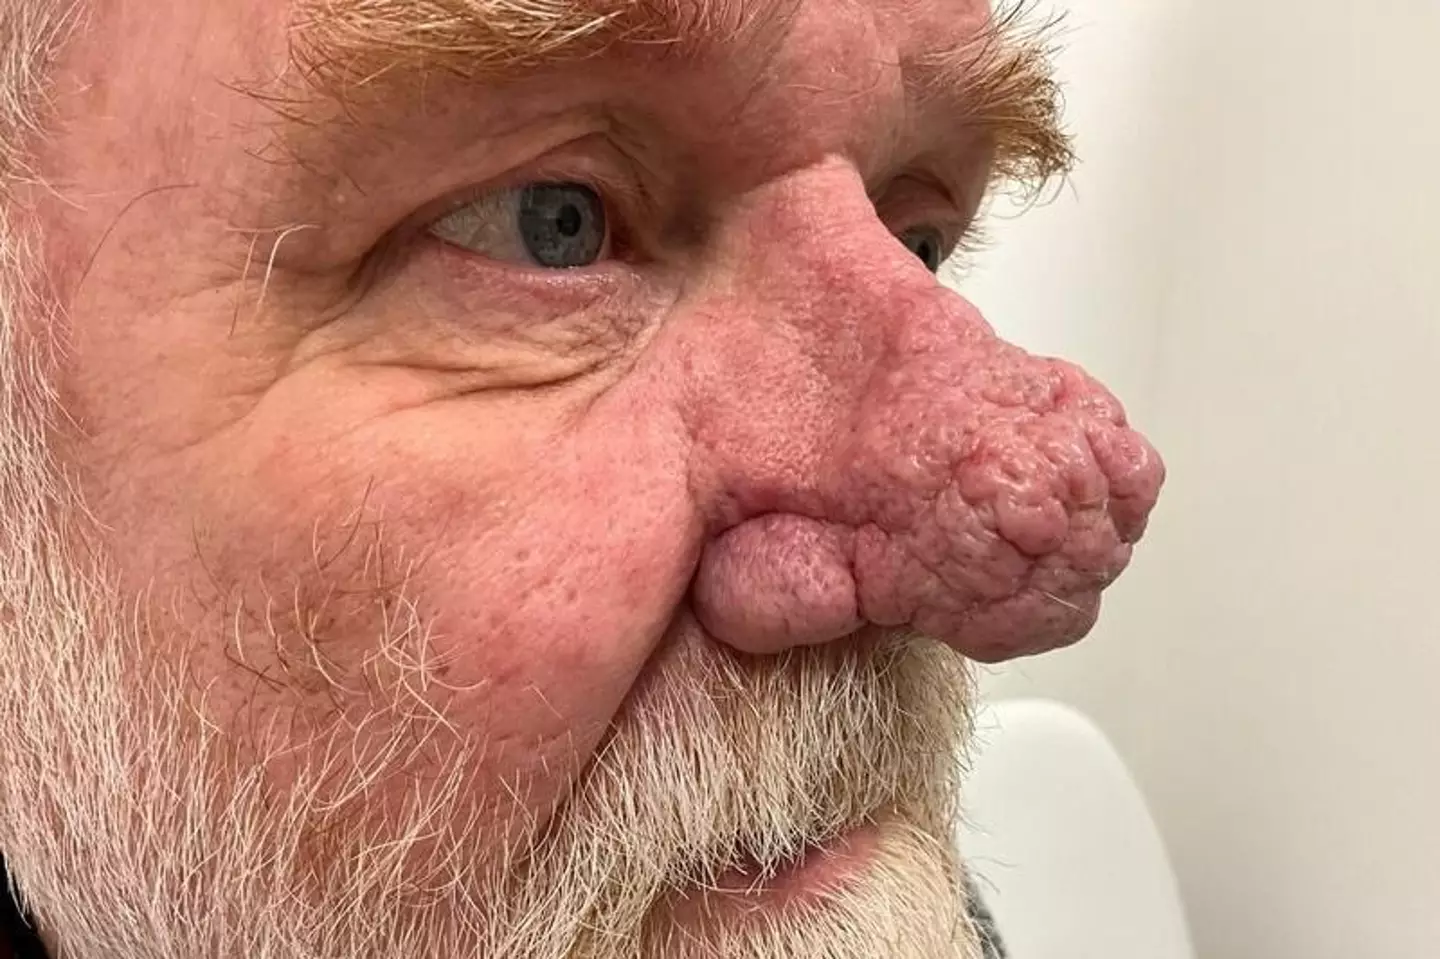 Ian suffered from a condition which caused his nose to swell up and keep growing.